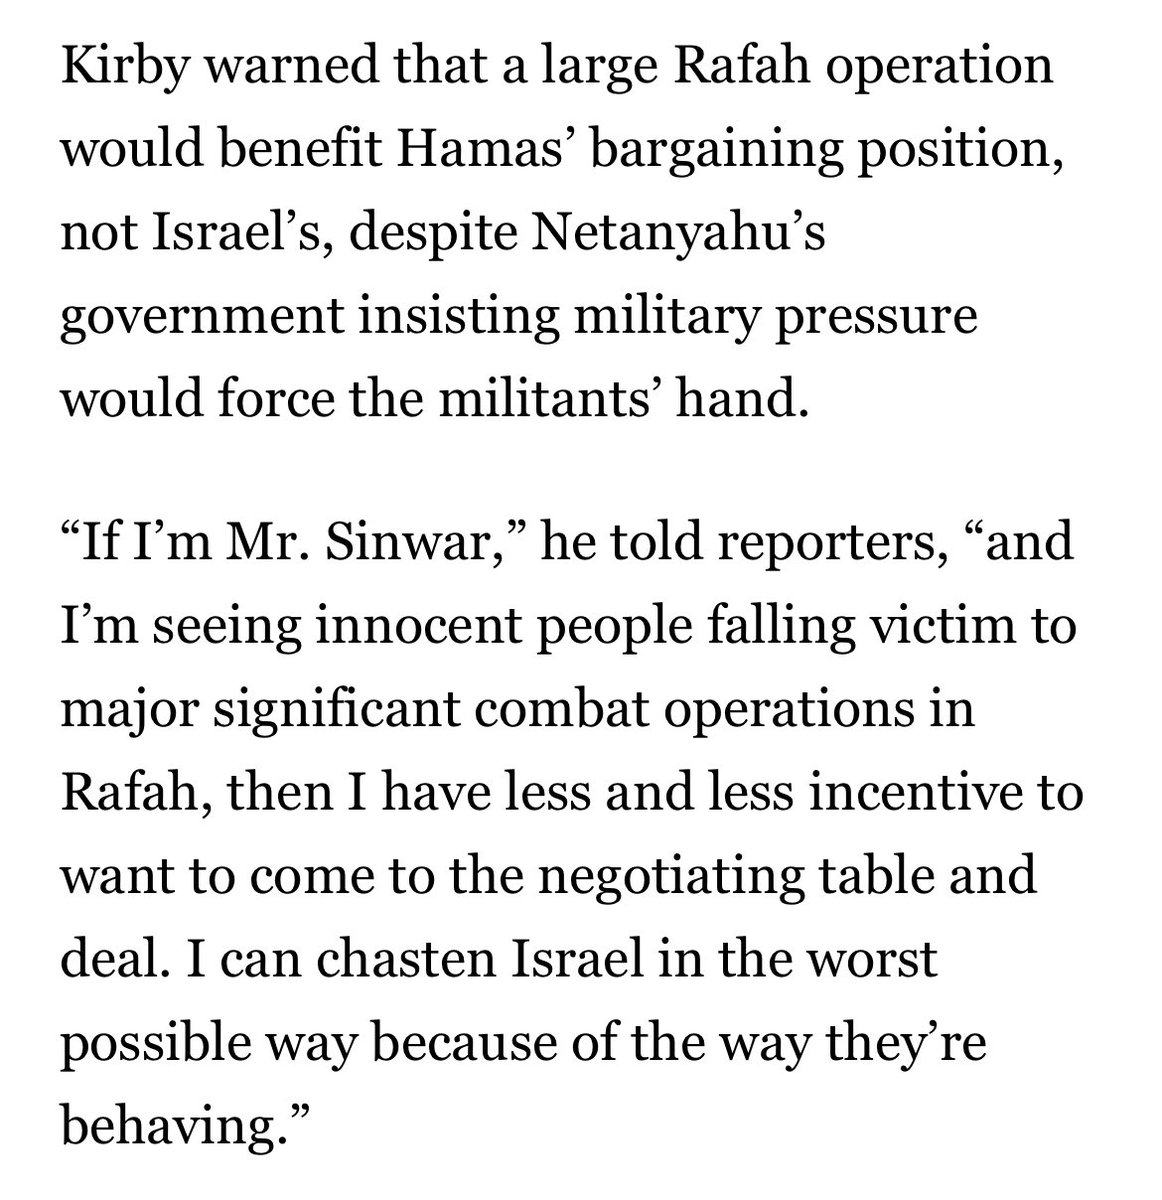 If Israel manages to destroy Hamas or wipeout a majority of its remaining fighters with its Rafah operation, how does that “benefit Hamas’ bargaining position”? Does the Biden Admin essentially believe that the operation in Rafah won’t destroy or further decimate Hamas?